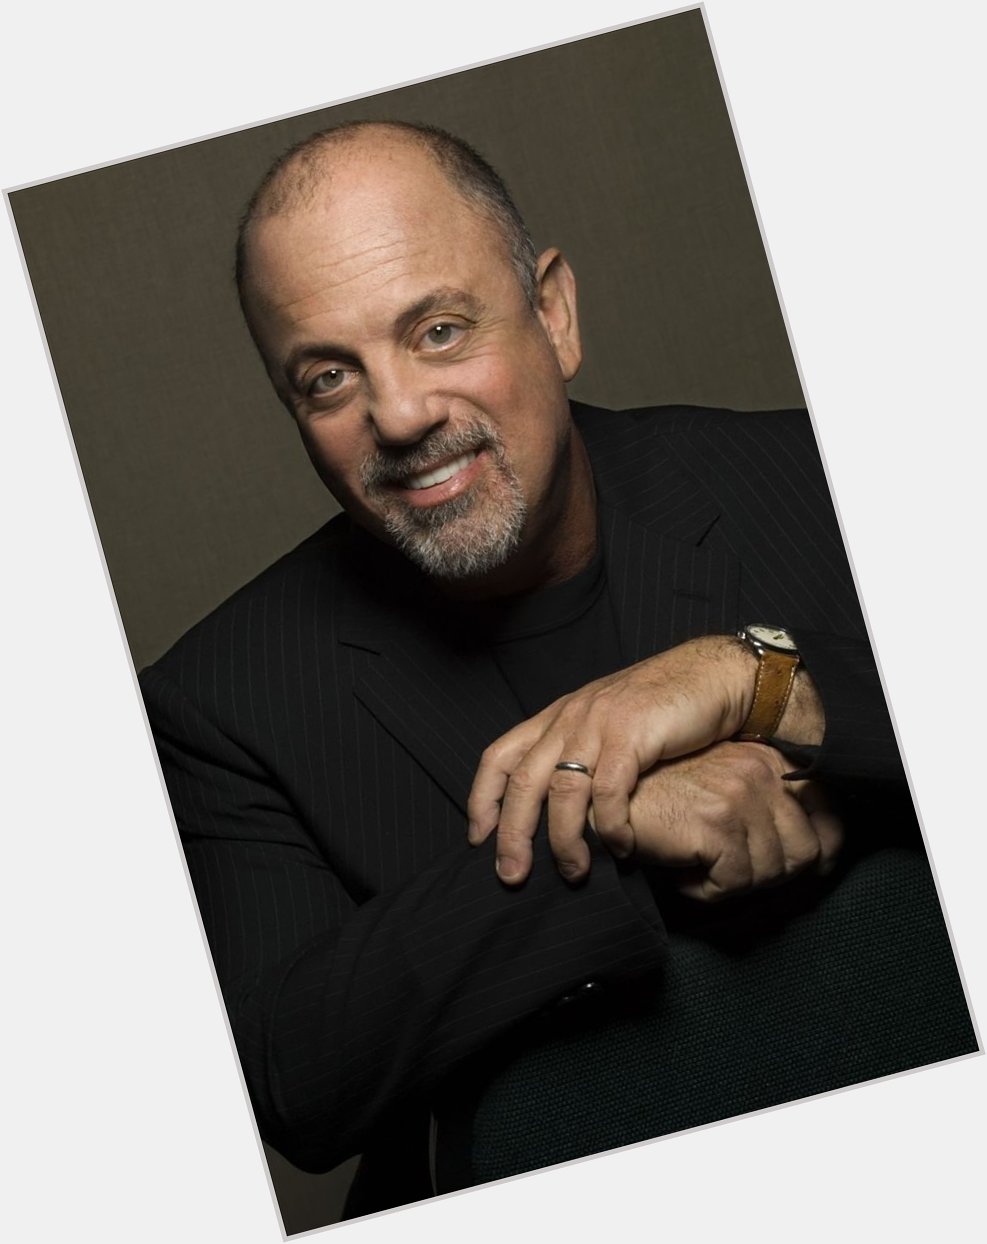 Happy 69th Birthday, Billy Joel! To celebrate, I will not be playing any Billy Joel today on 